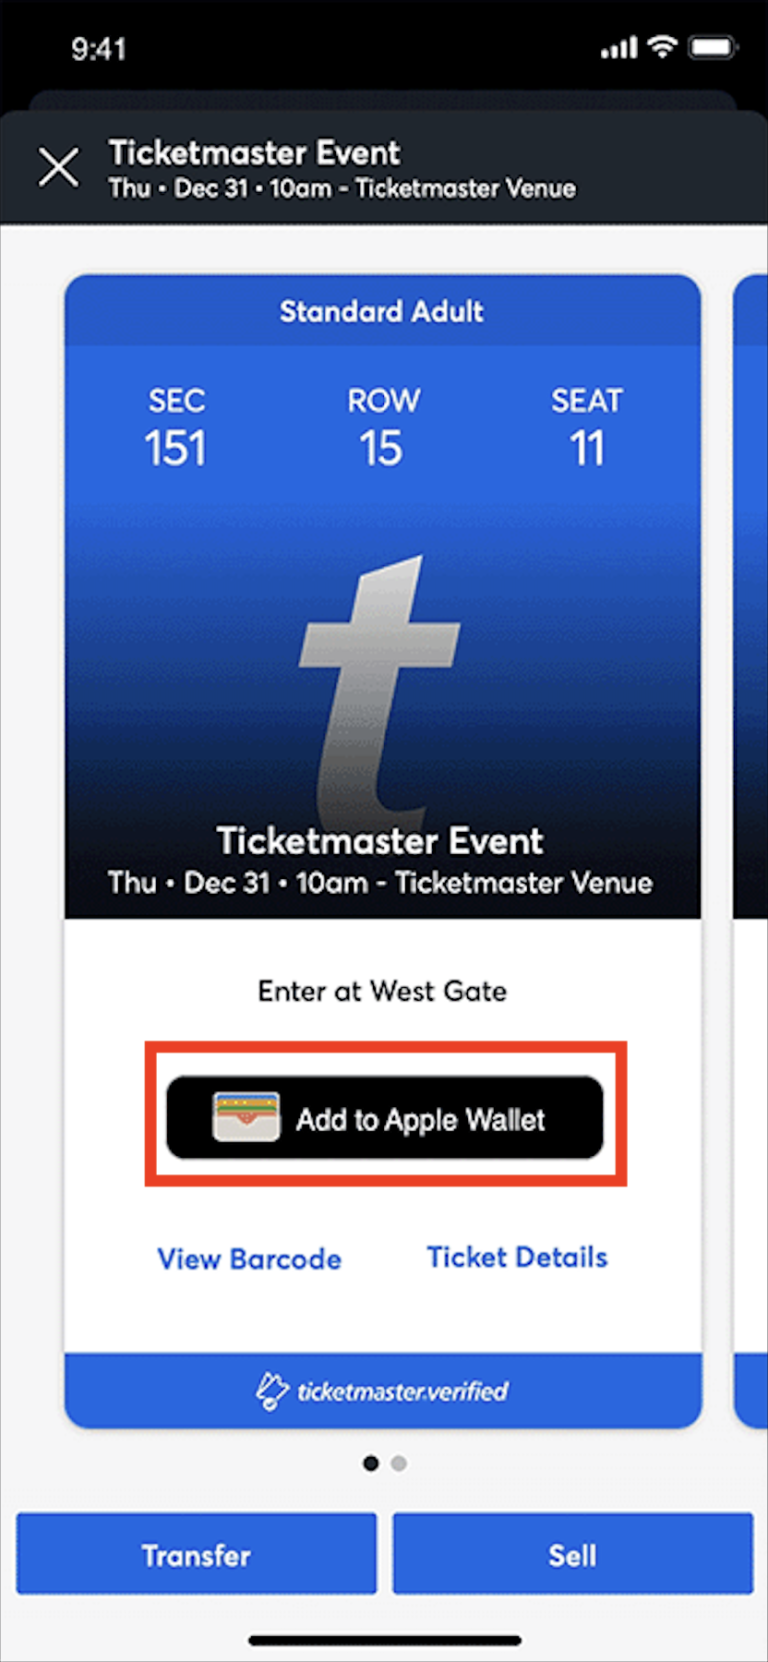 How To Transfer Ticketmaster Tickets From Apple Wallet - NetworkBuildz